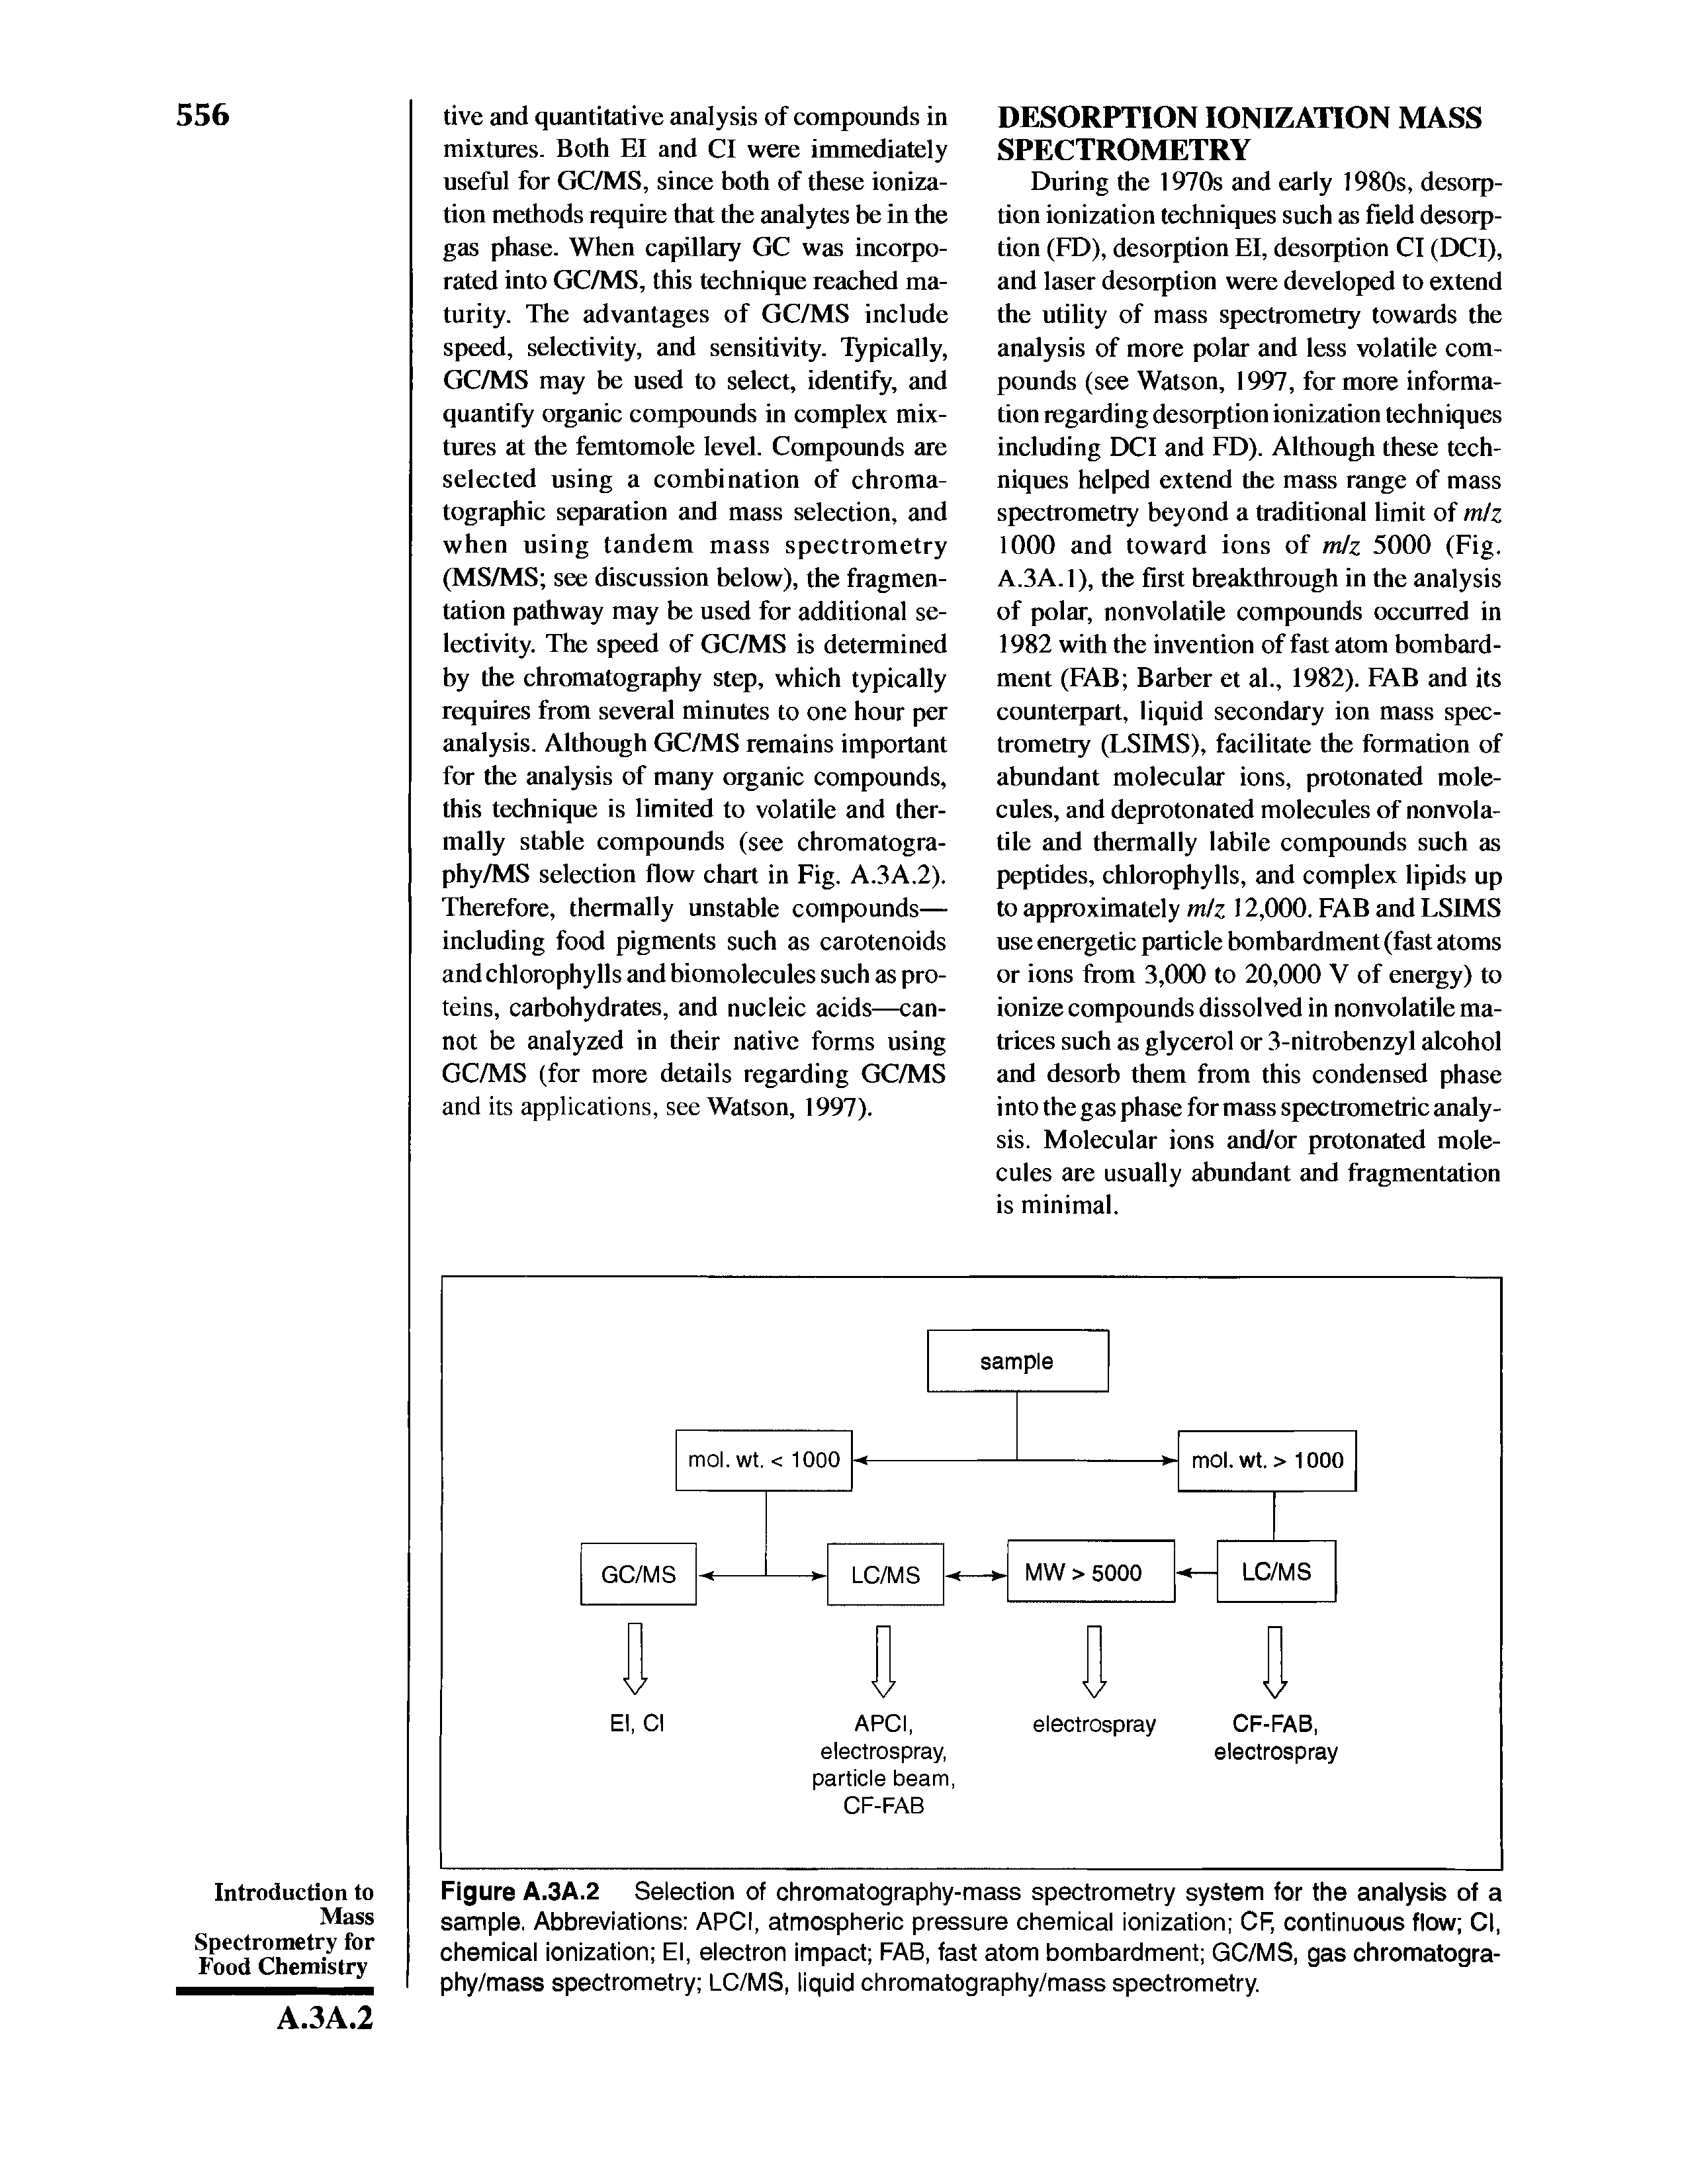 Figure A.3A.2 Selection of chromatography-mass spectrometry system for the analysis of a sample. Abbreviations APCI, atmospheric pressure chemical ionization CF, continuous flow Cl, chemical ionization El, electron impact FAB, fast atom bombardment GC/MS, gas chromatogra-phy/mass spectrometry LC/MS, liquid chromatography/mass spectrometry.